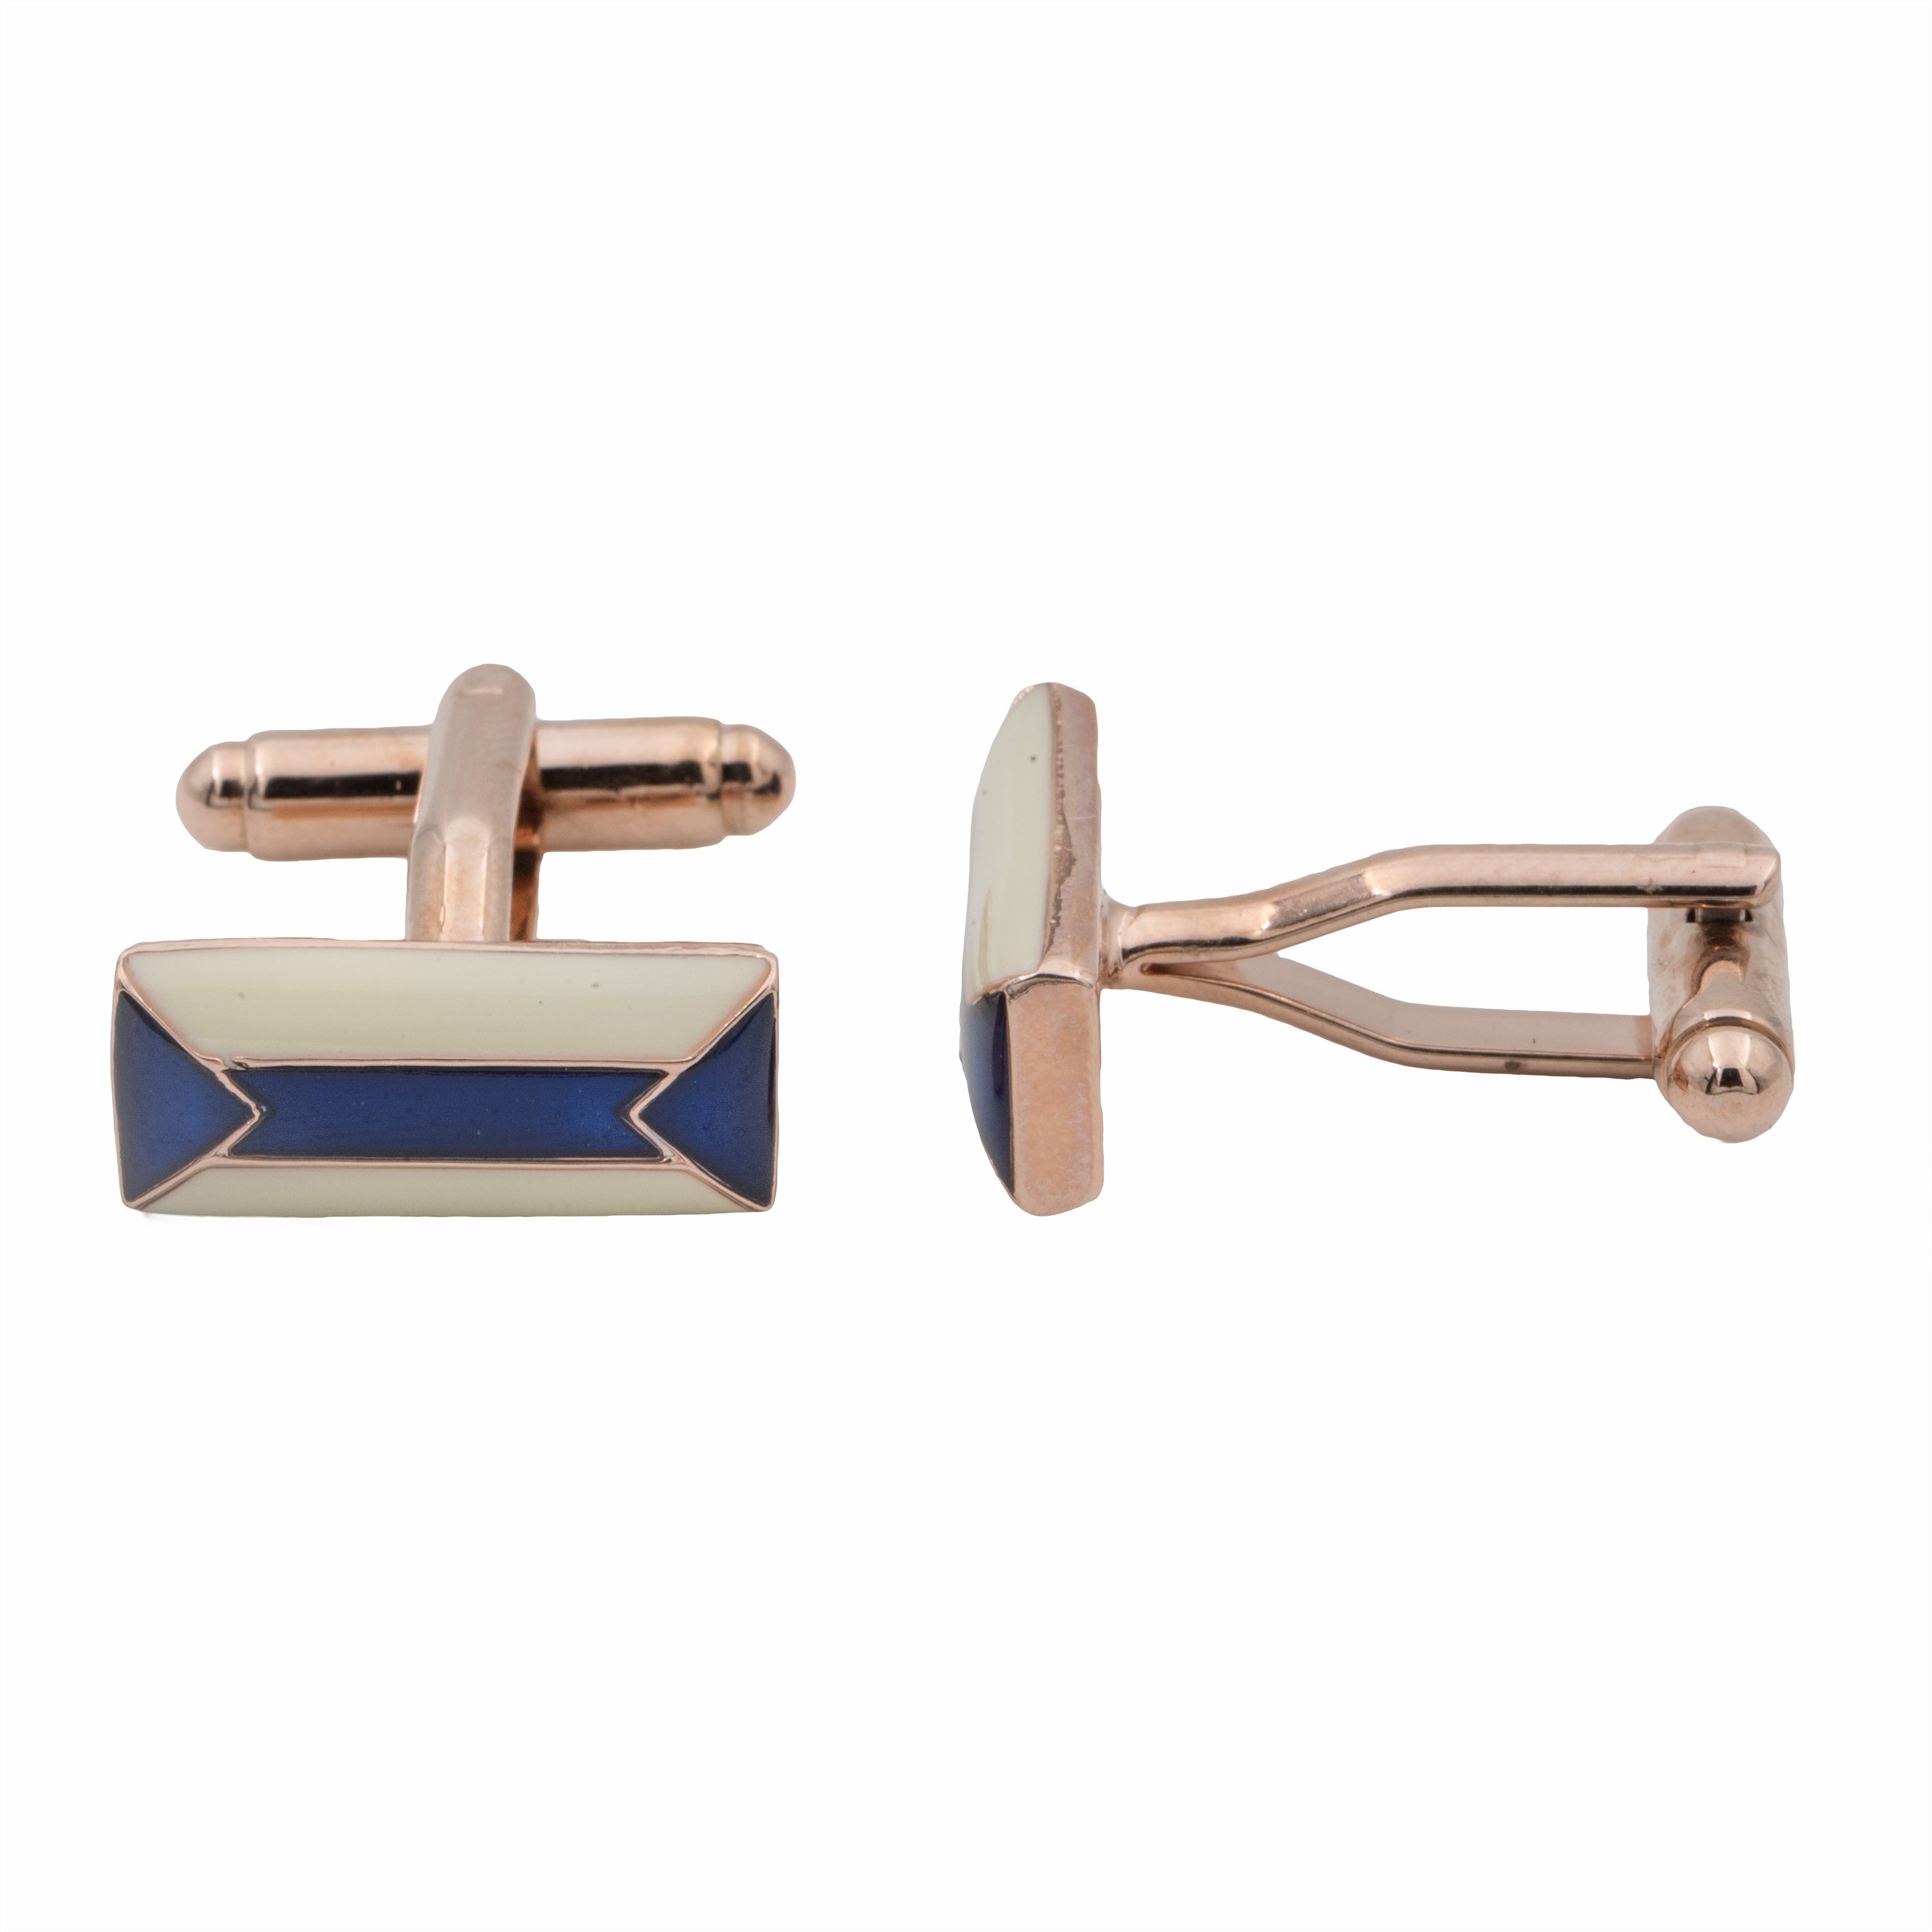 Pyrenees Cufflinks - Ivory and Blue